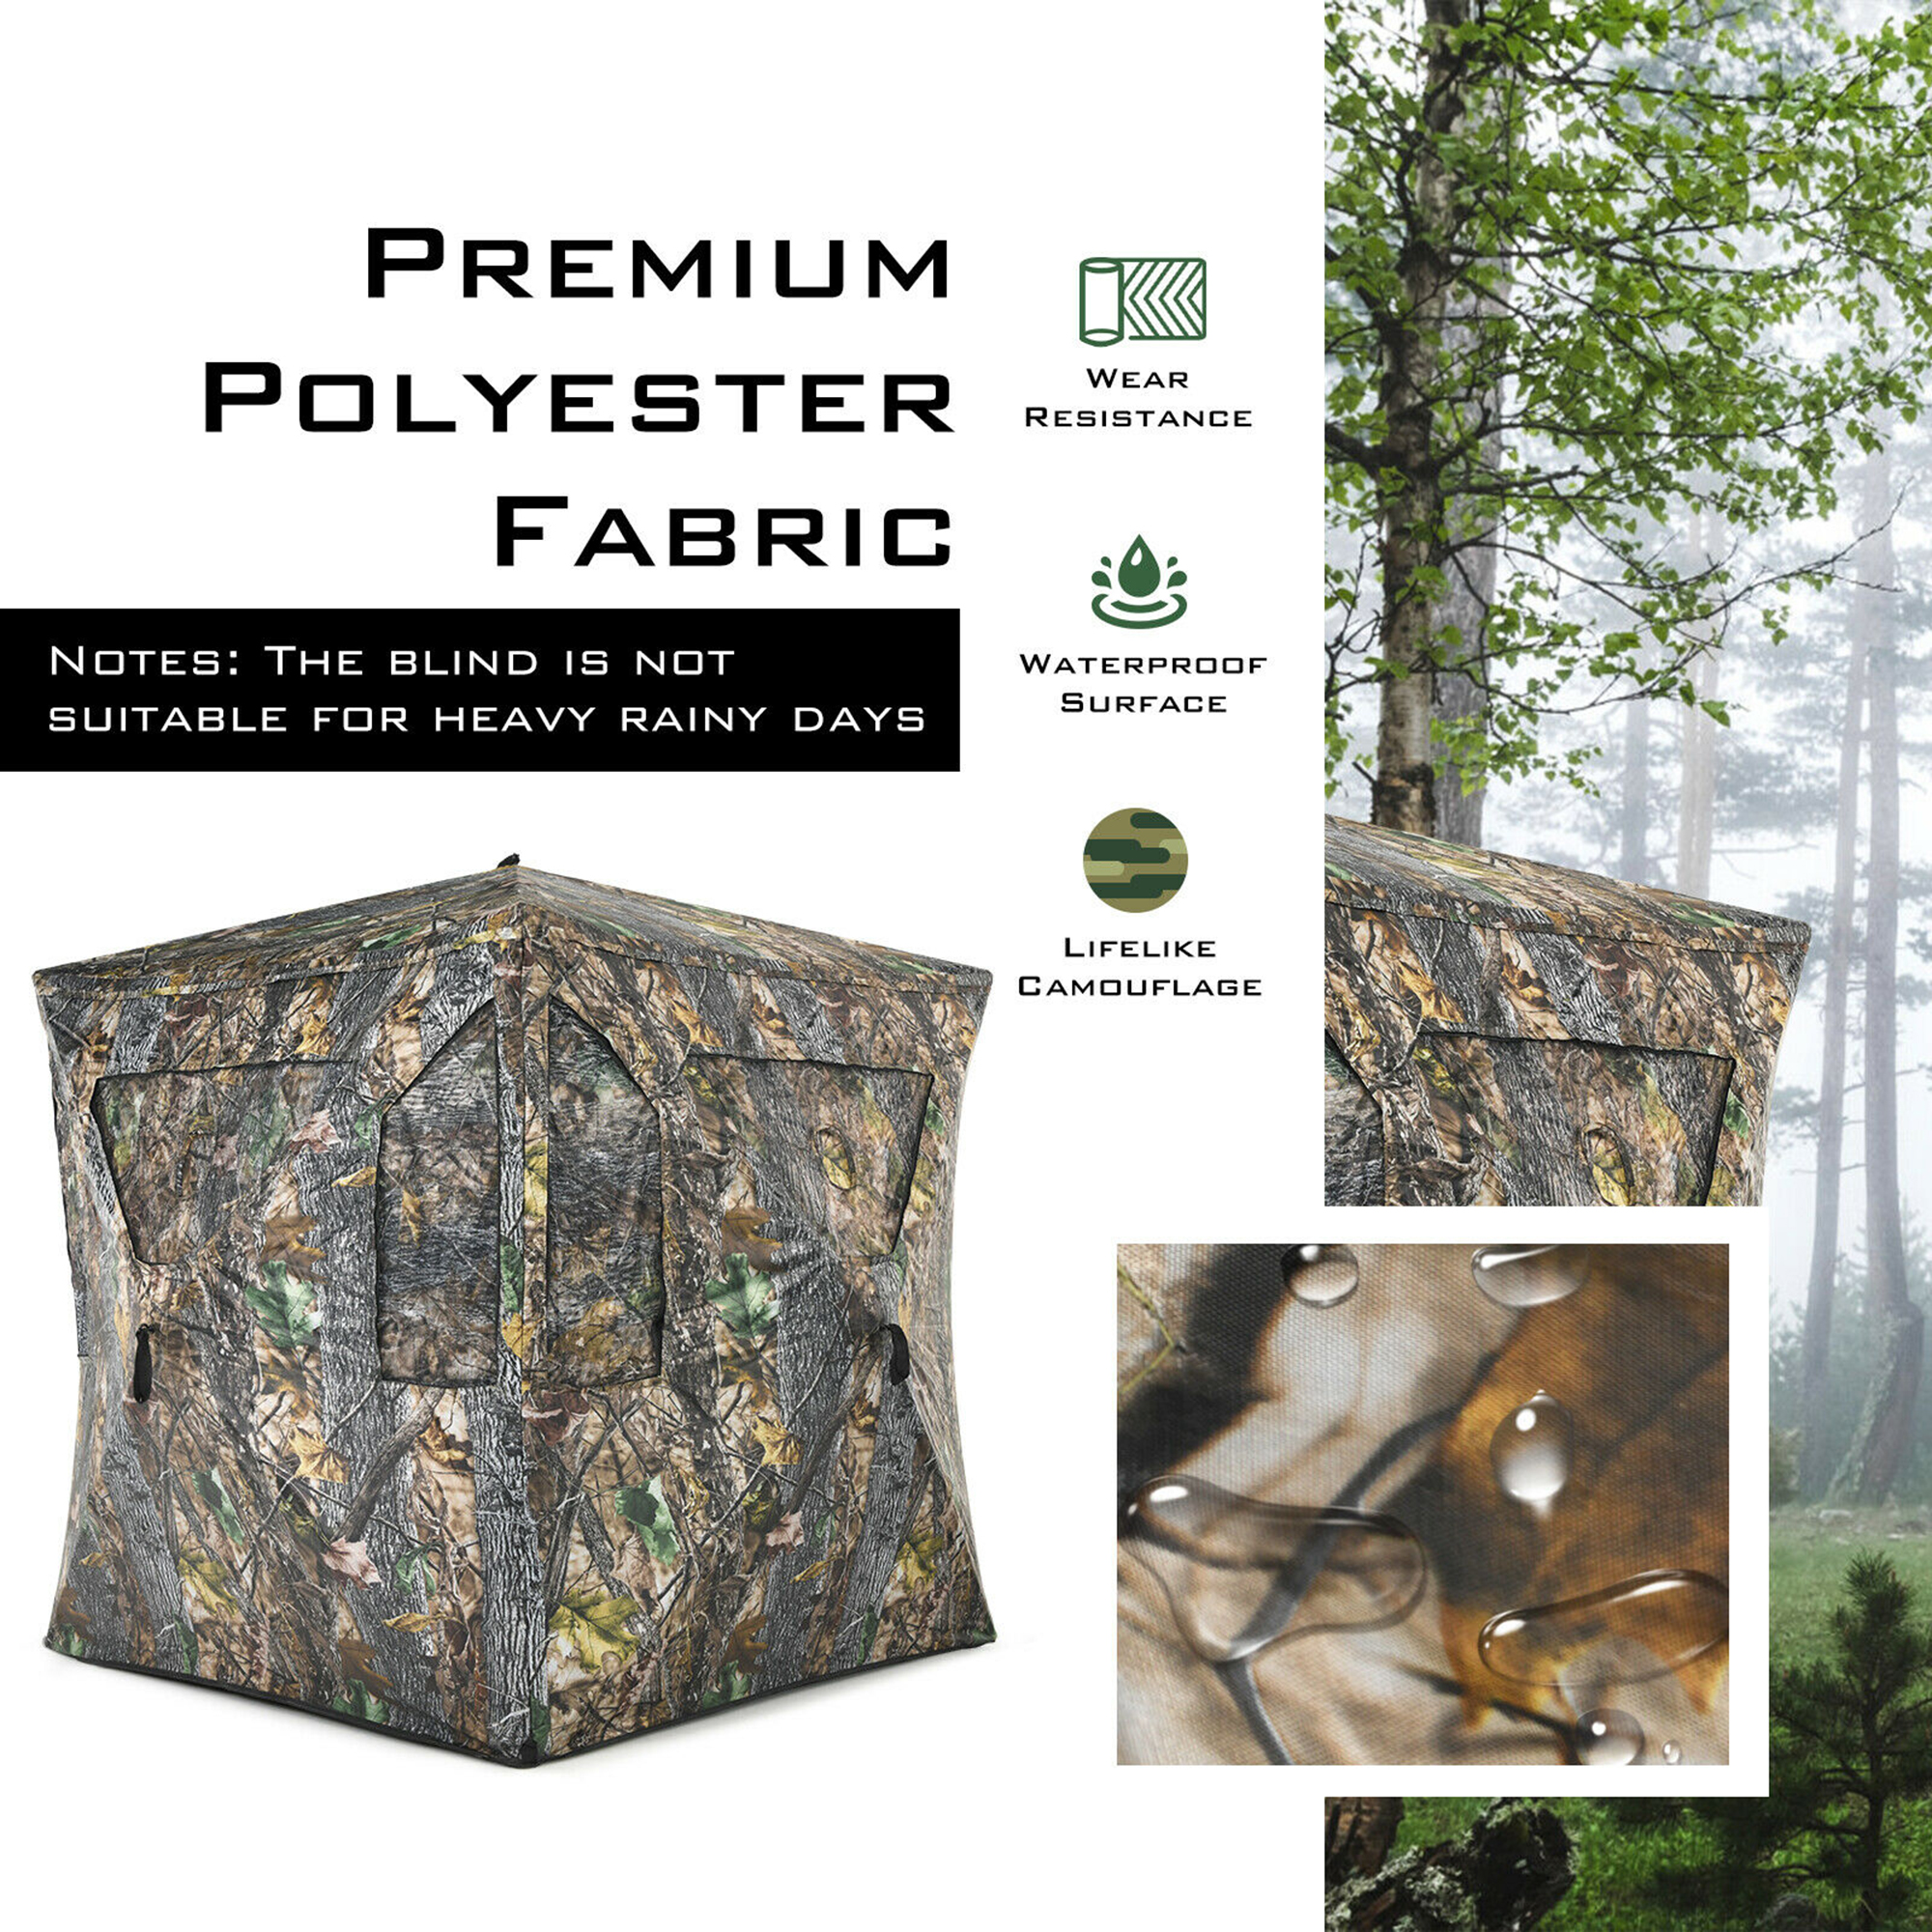 Costway 3 Person Portable Hunting Blind Pop-Up Ground Tent w/ Gun Ports & Carrying Bag